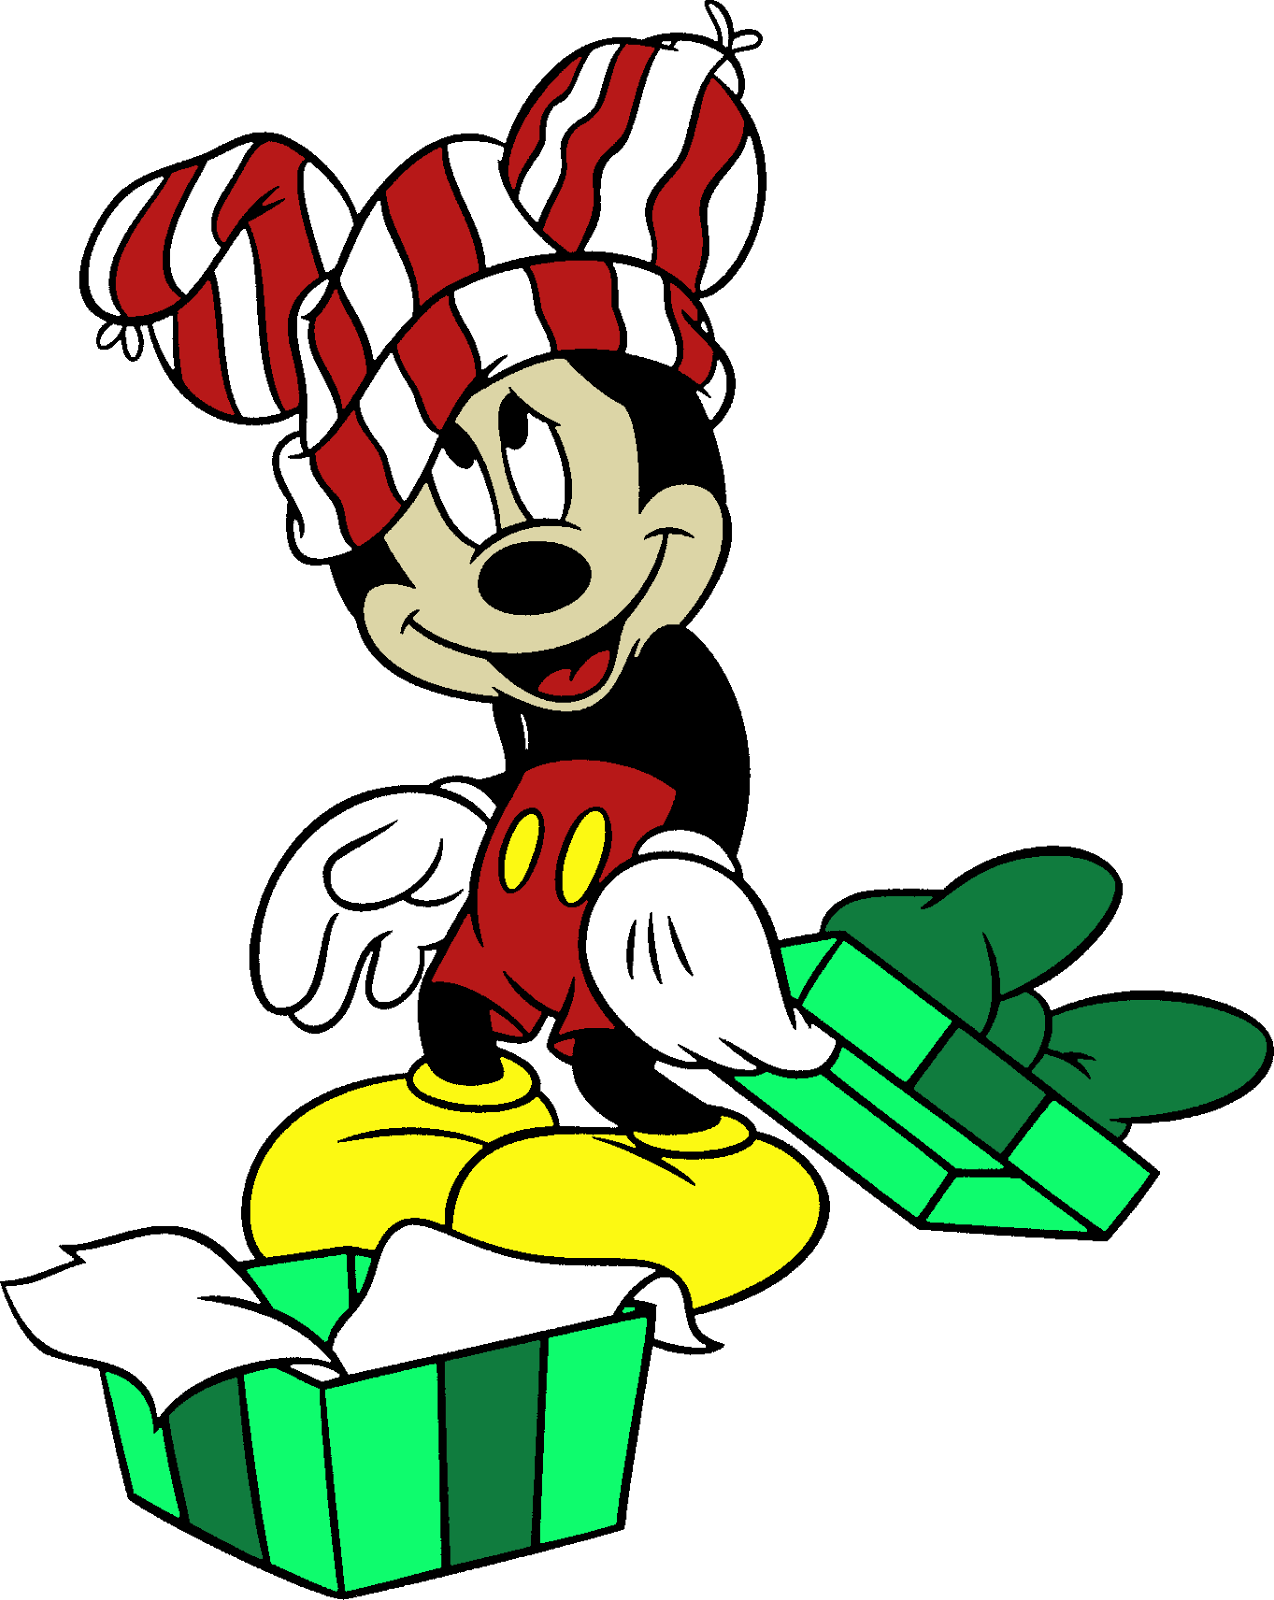 Christmas mouse at getdrawings. Sailor clipart goofy